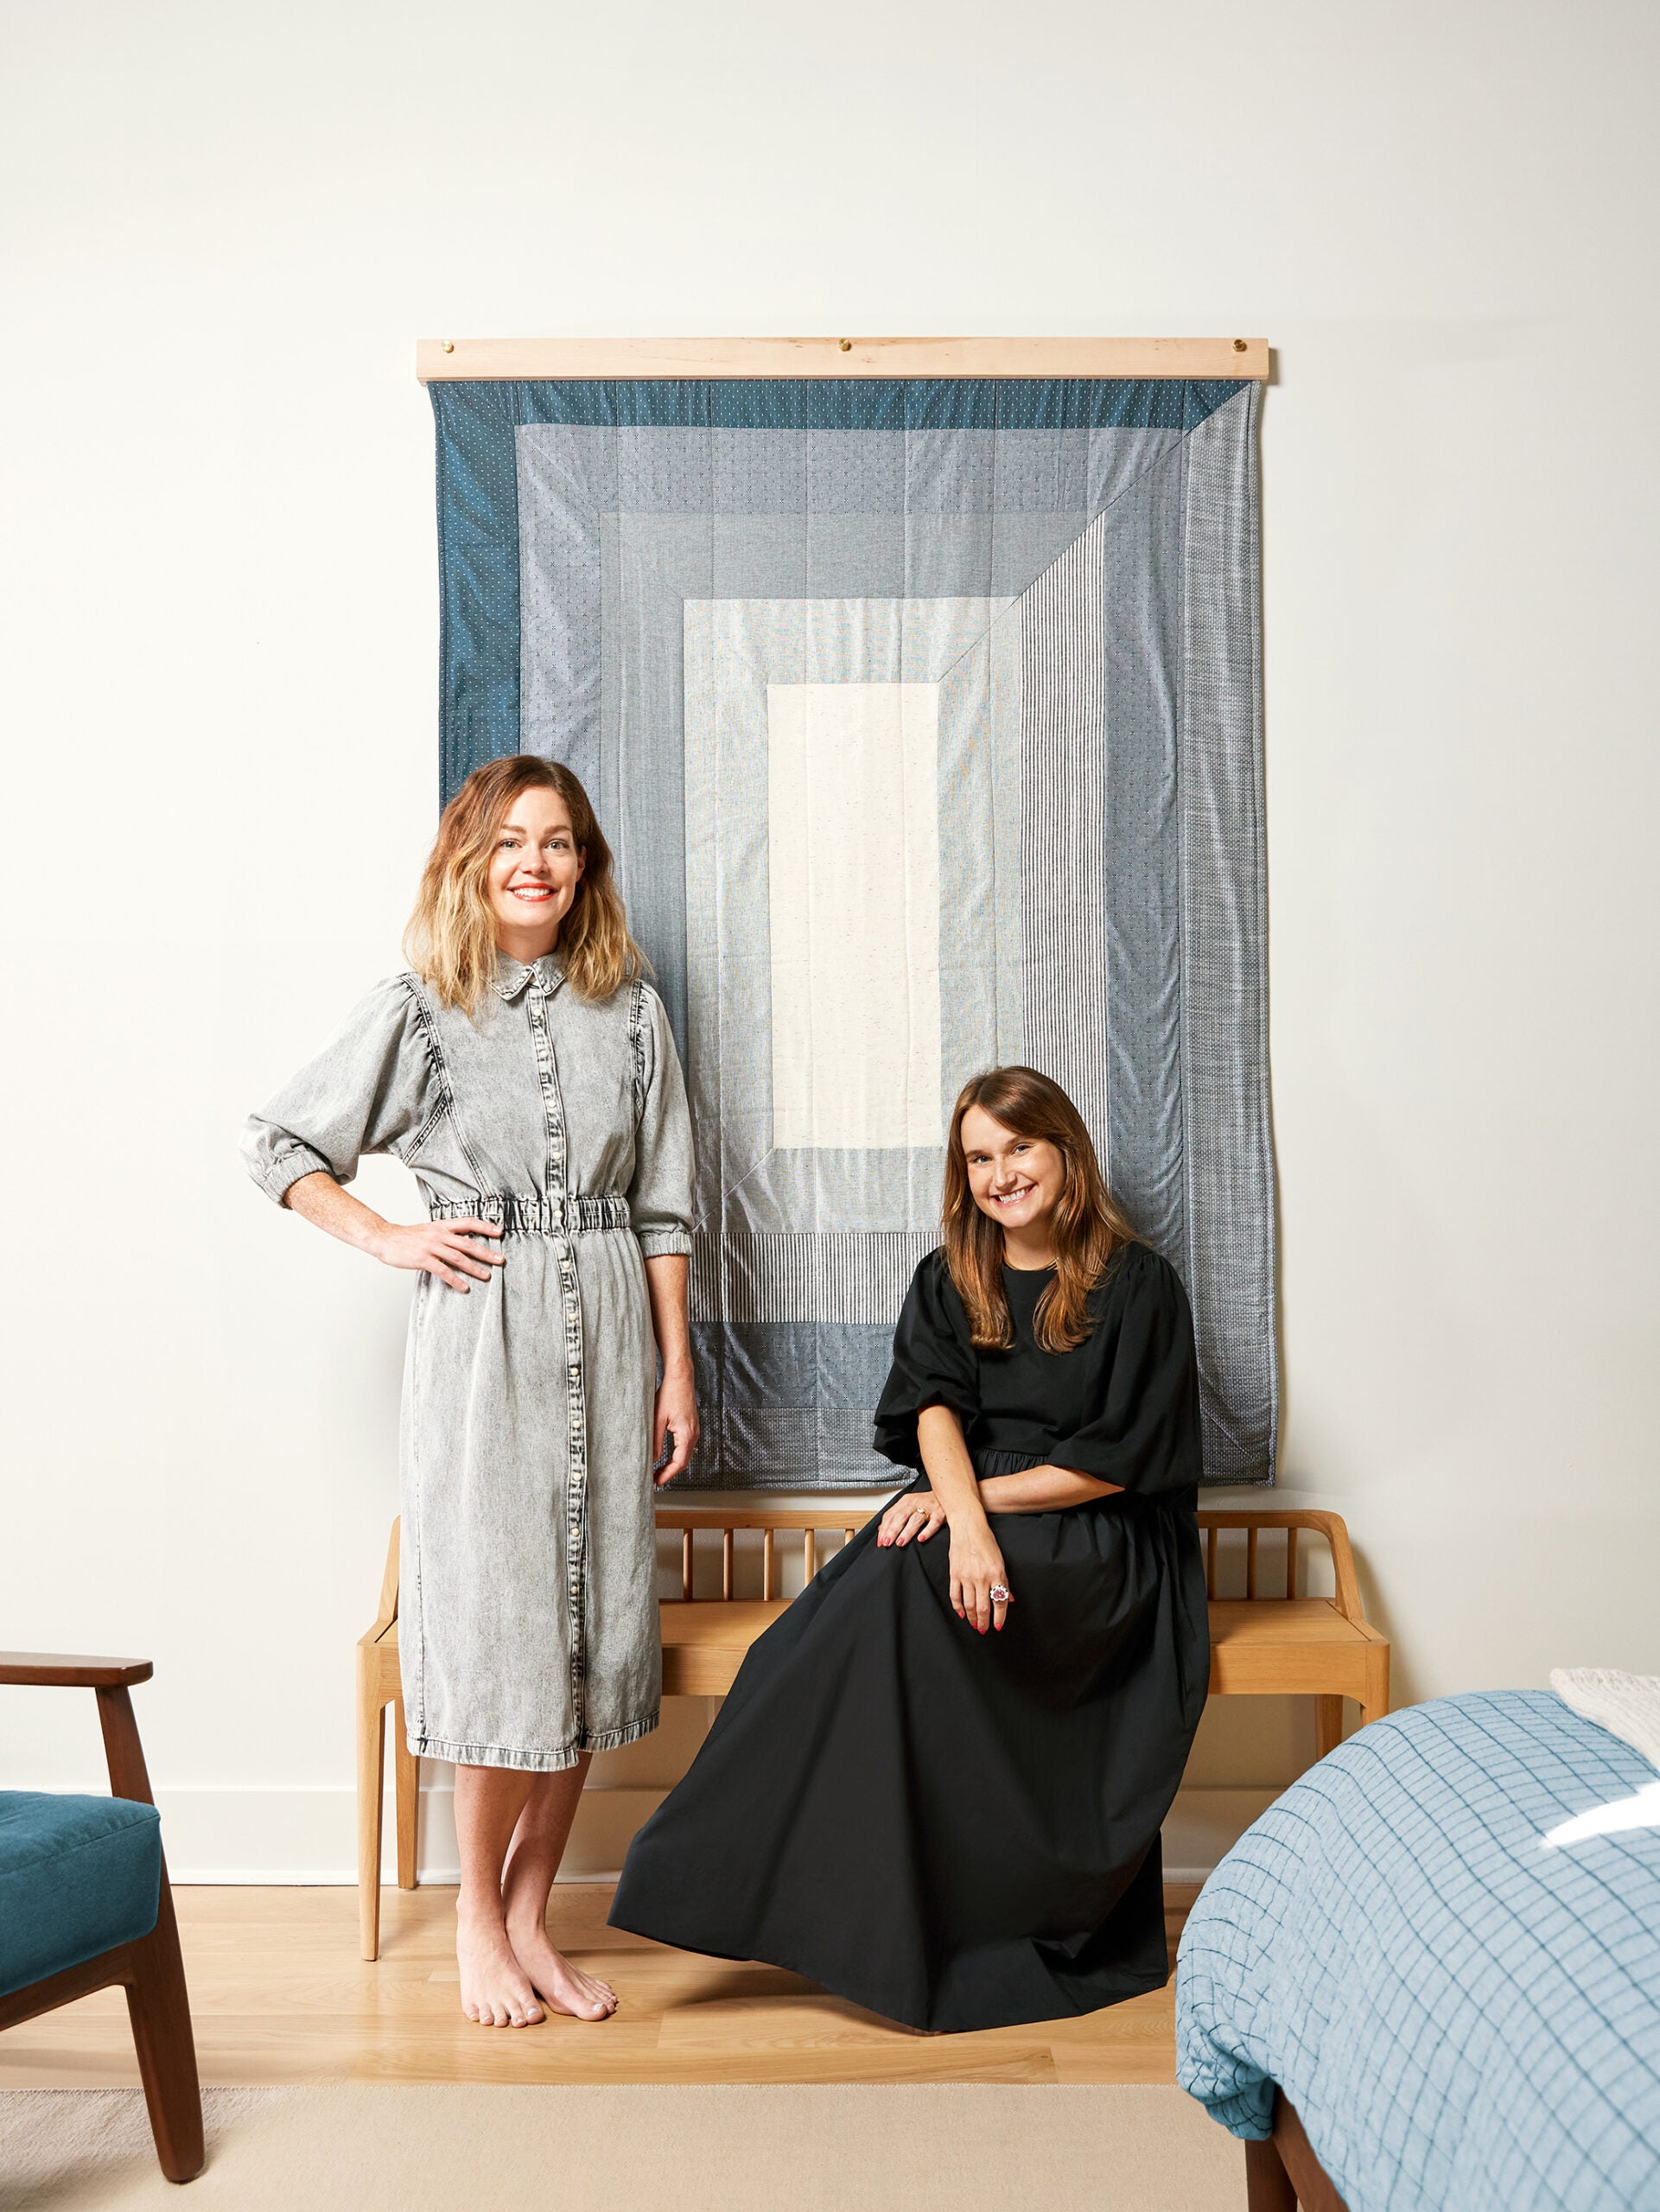 Designers Kate Hayes and Krista Sharif